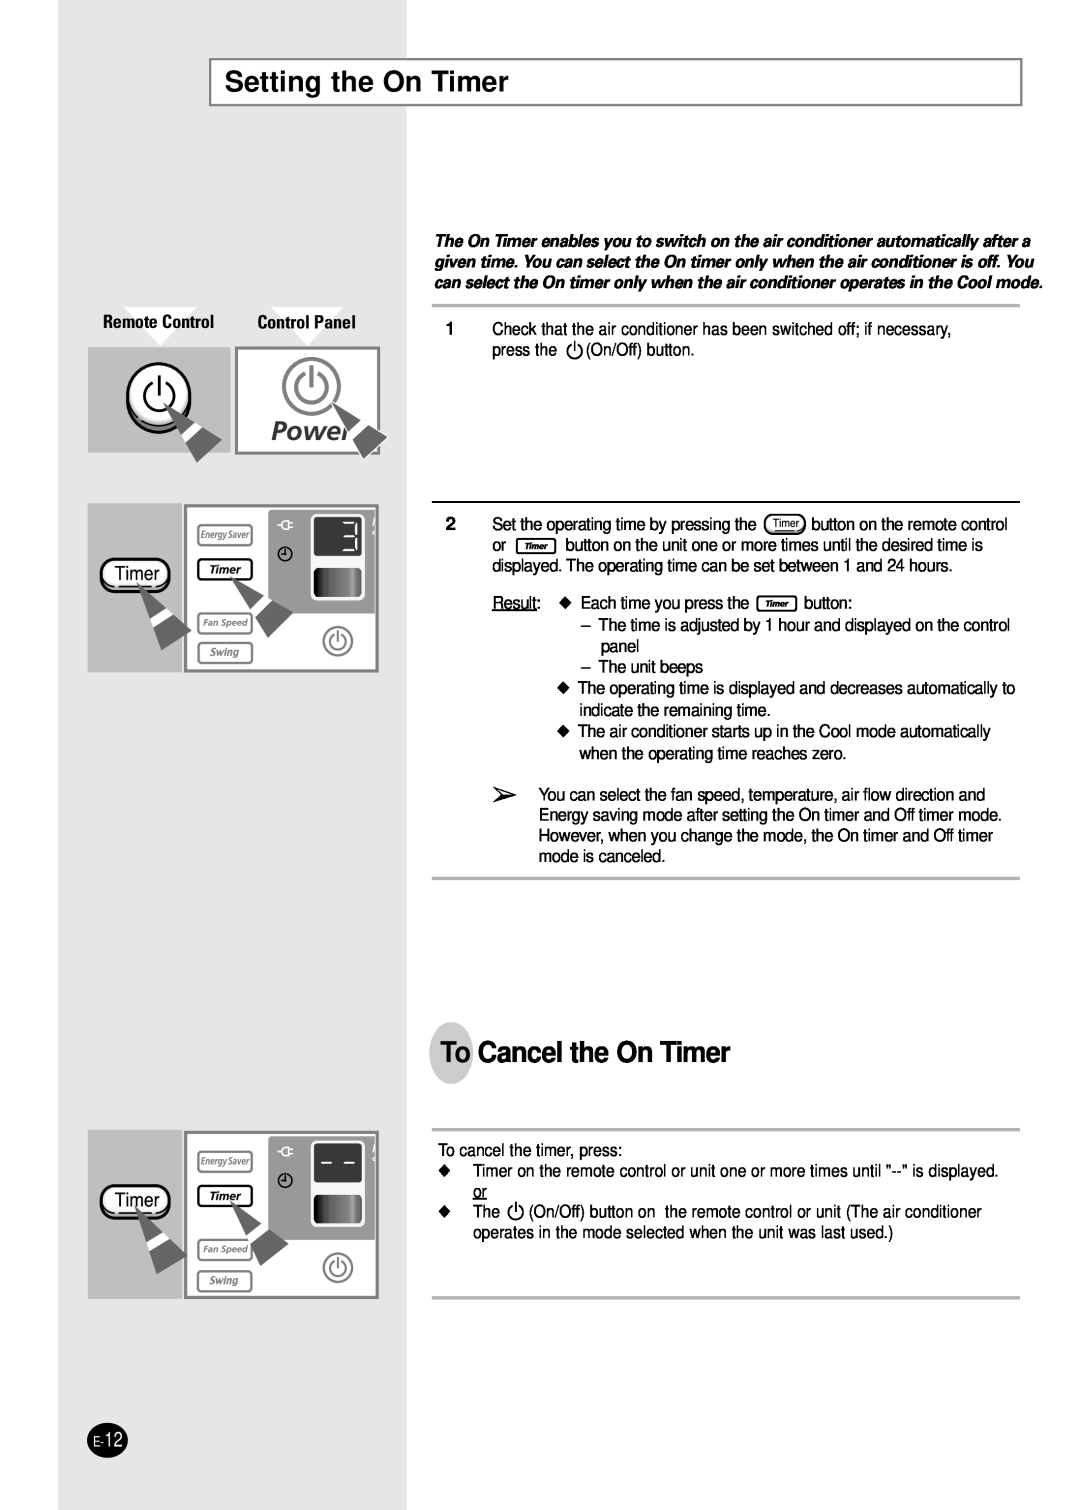 Samsung AW2400B manual Setting the On Timer, To Cancel the On Timer, Remote Control, Control Panel 